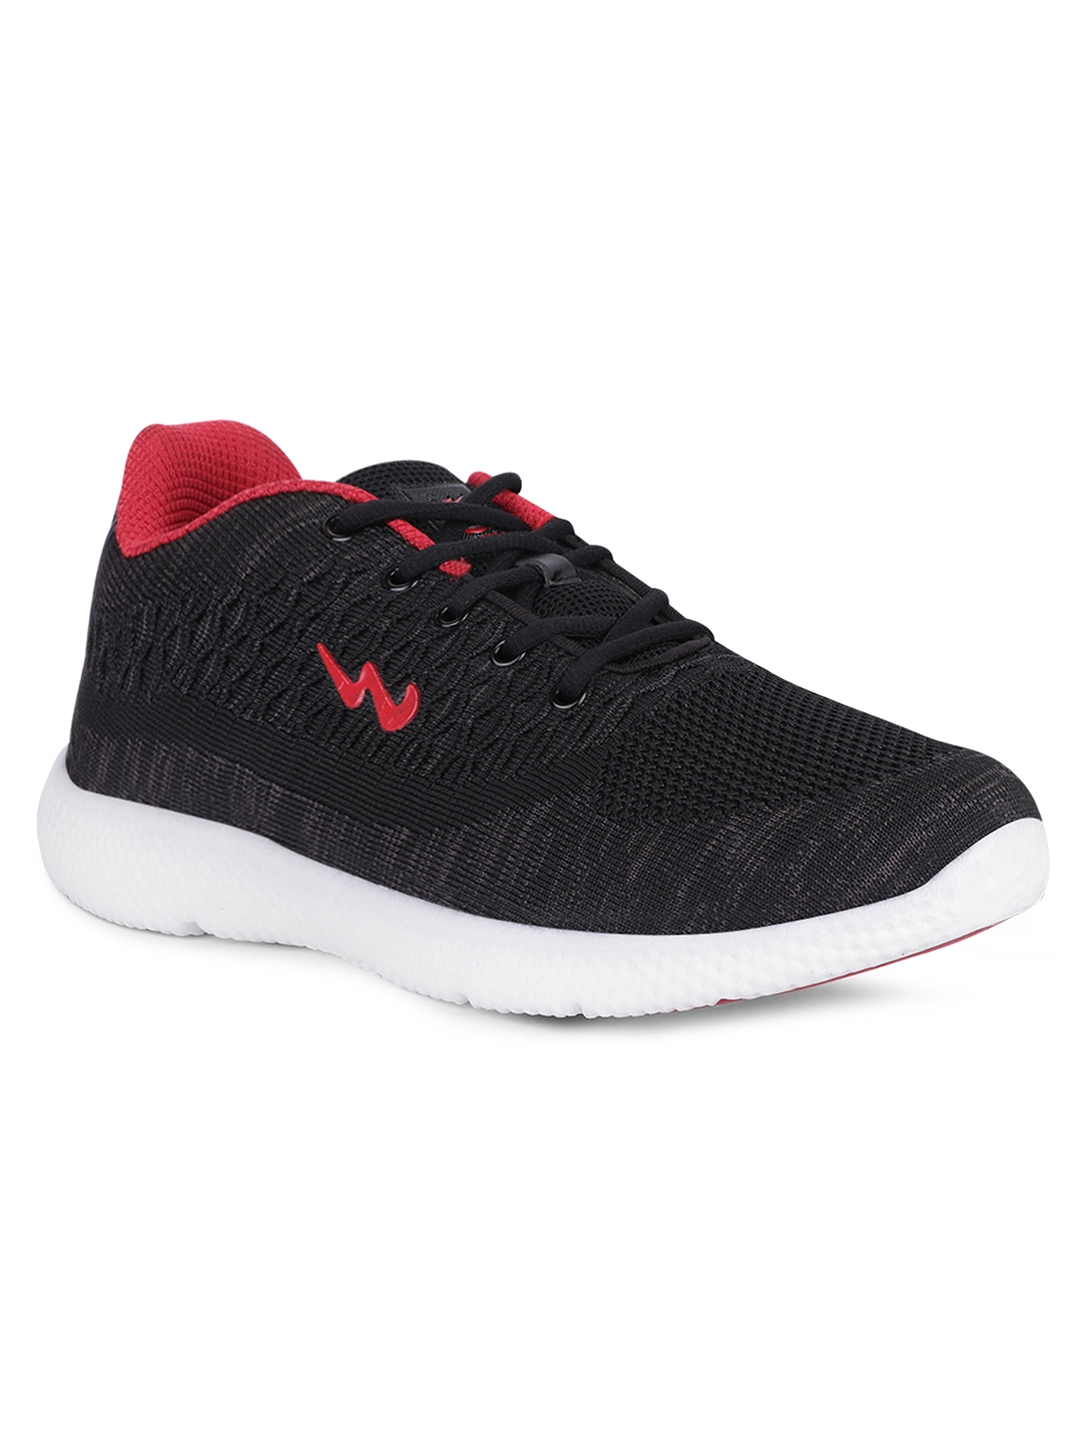 Campus Shoes | Black Crest Running Shoes